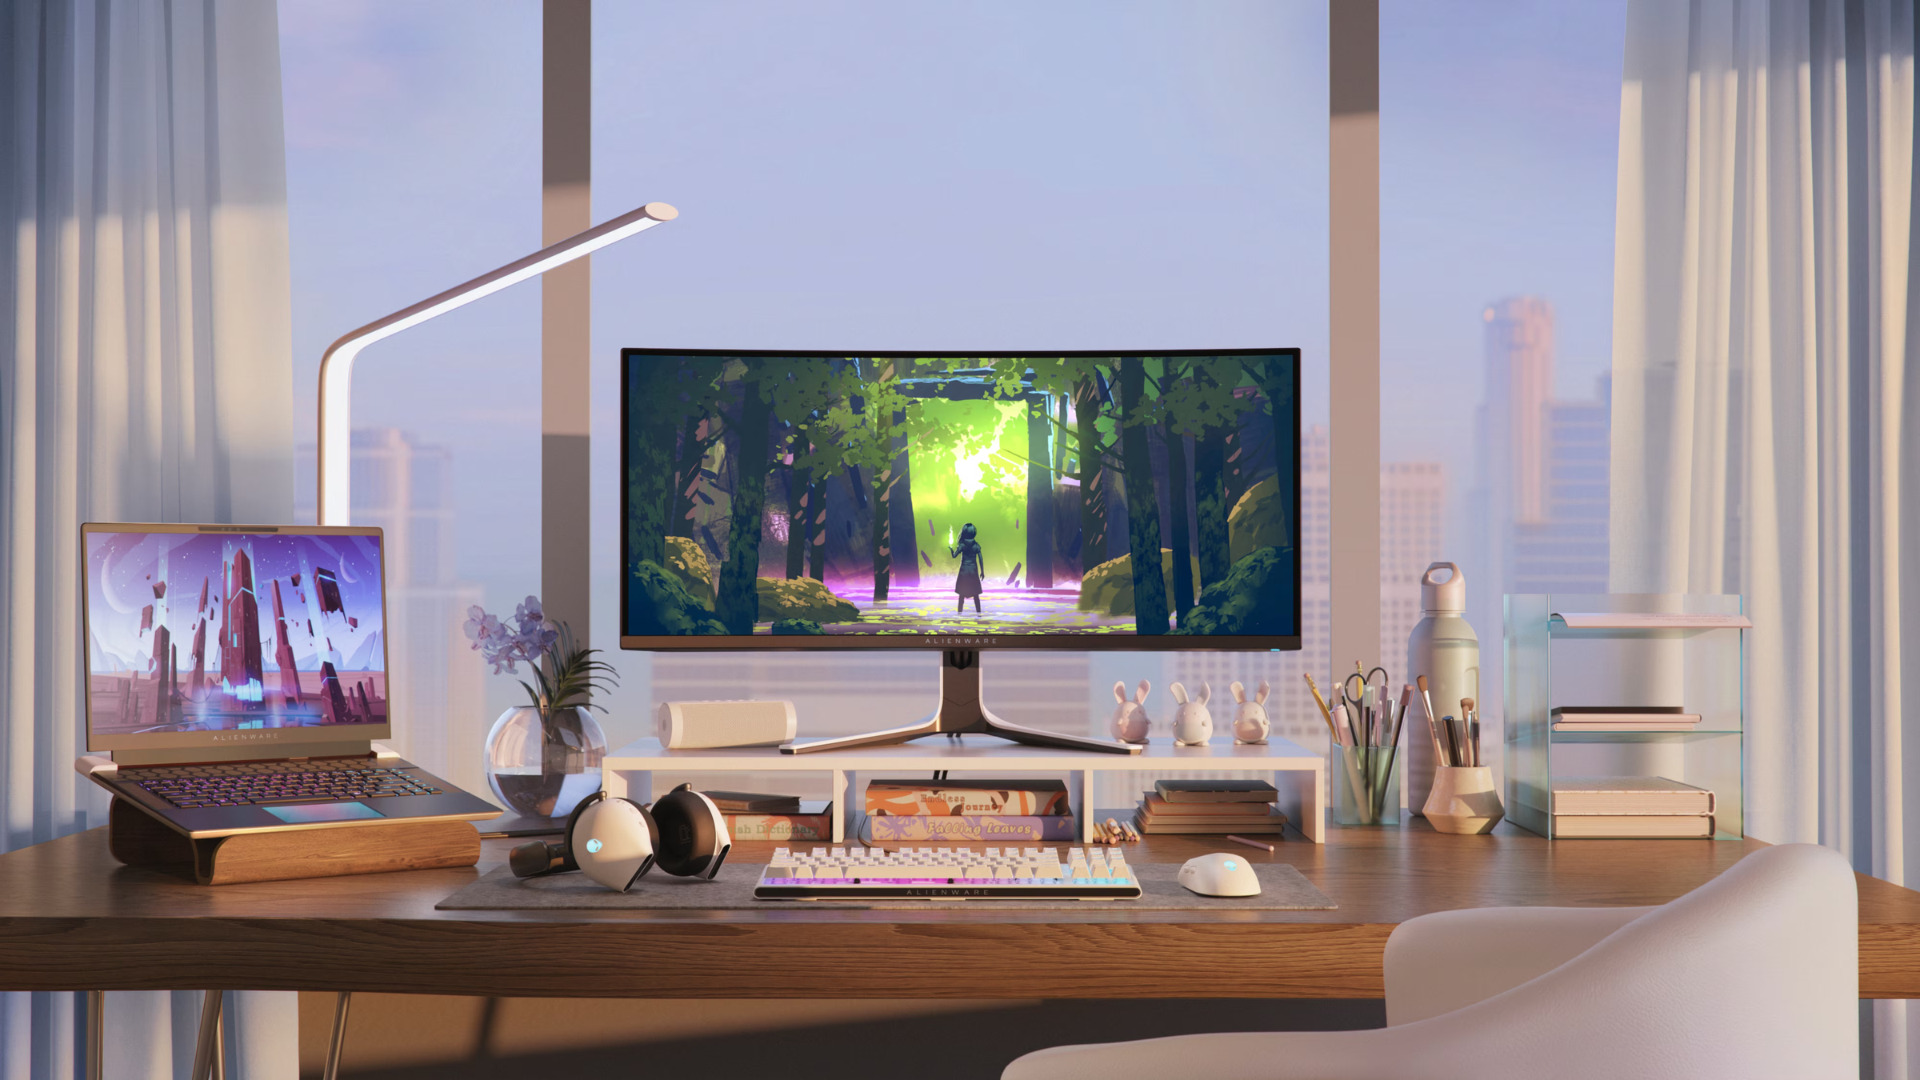 This Dell Alienware curved gaming monitor is -26% off and perfect for gaming.